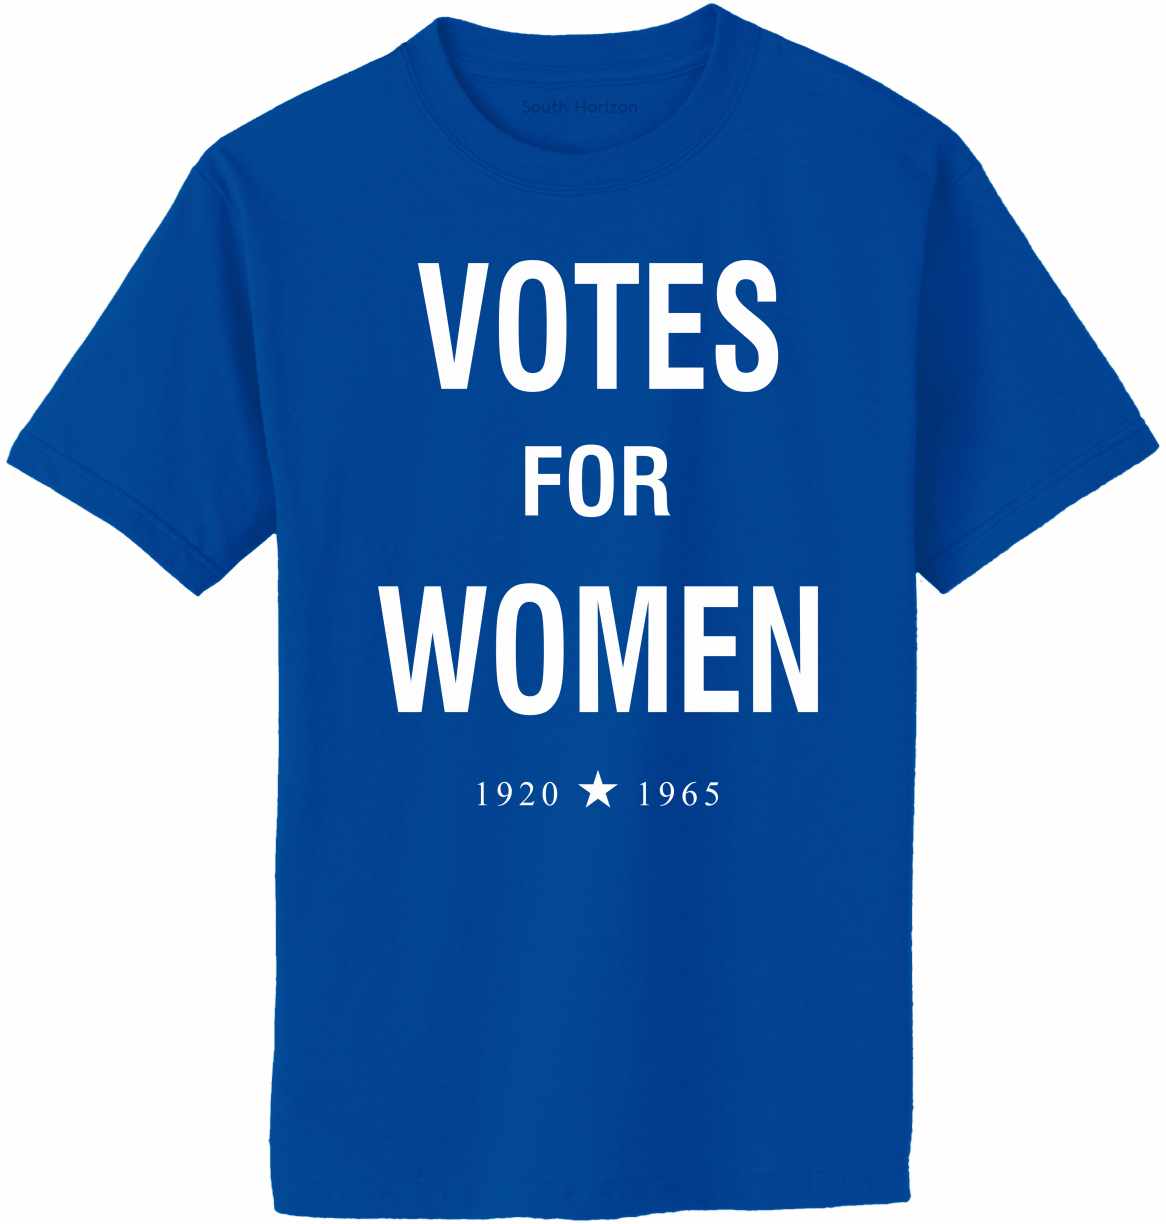 Votes For Women Adult T-Shirt